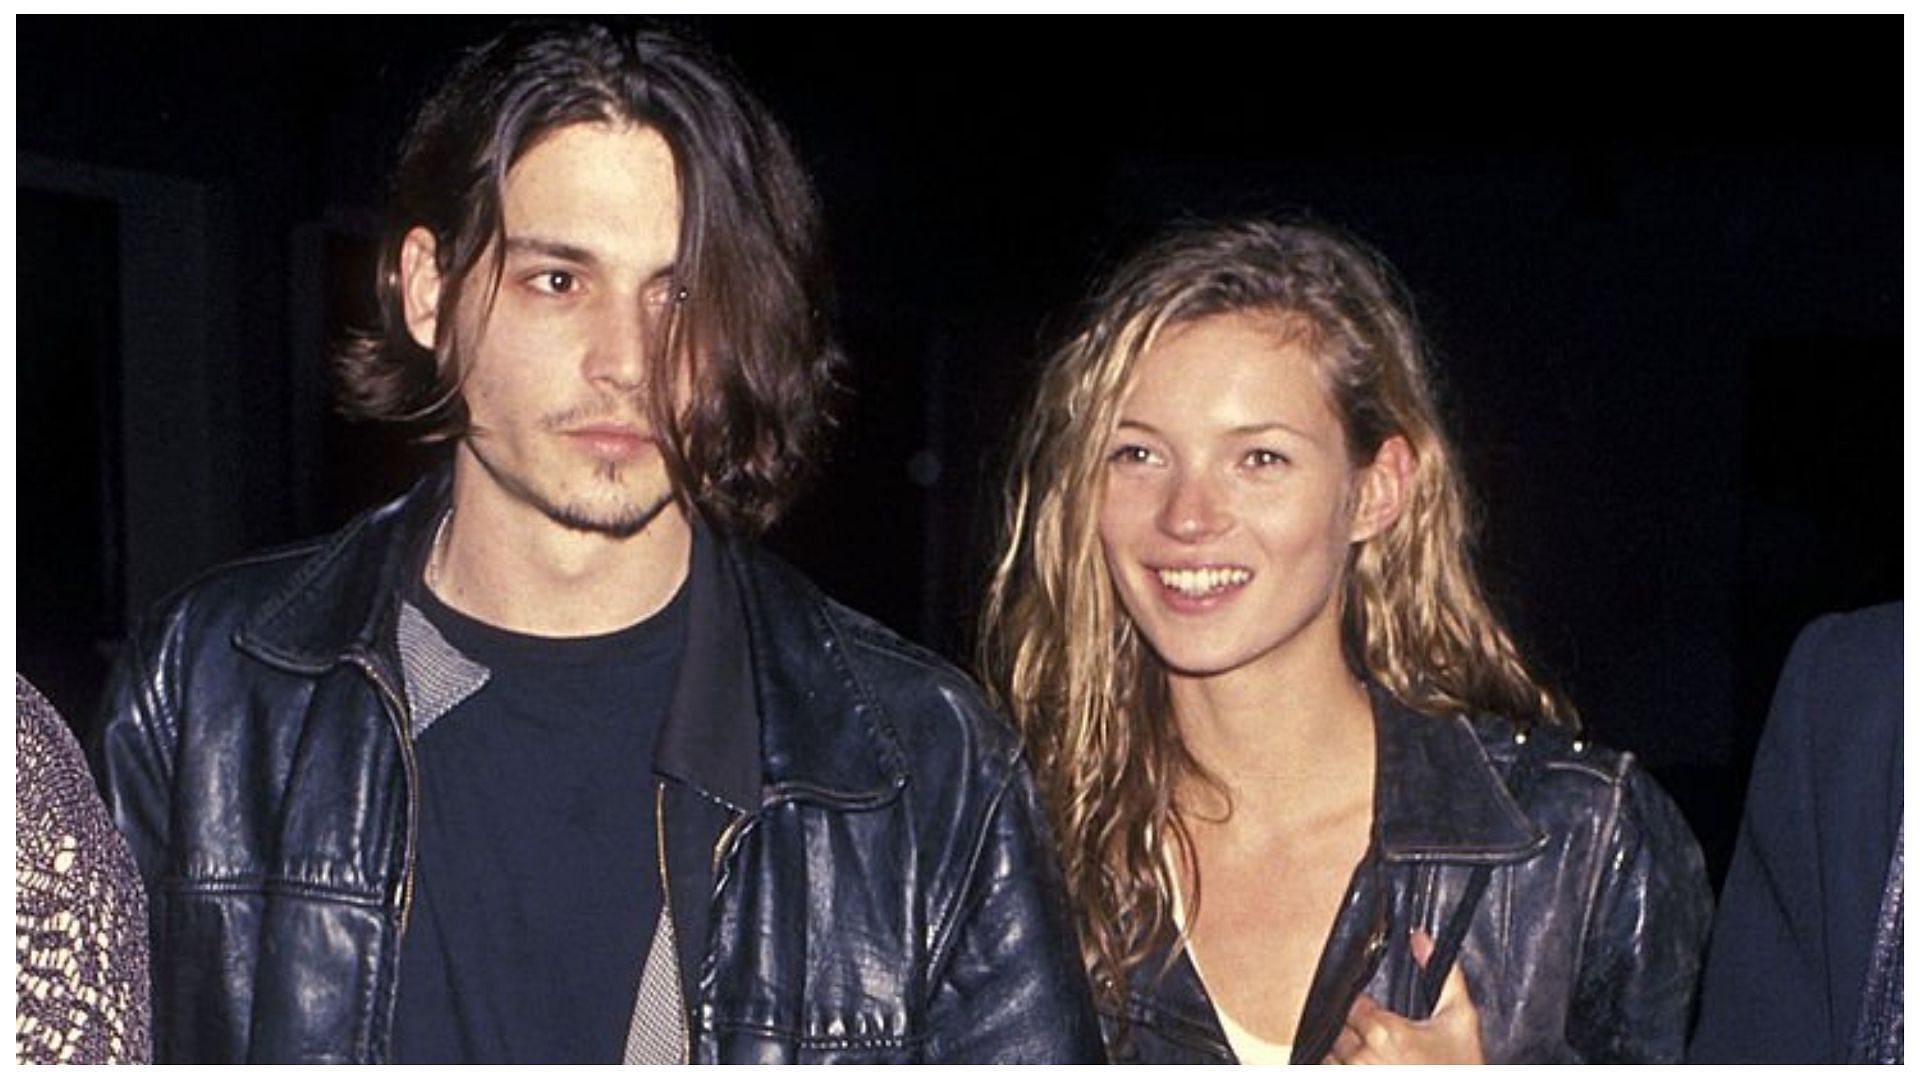 Kate Moss revealed why she defended Johnny Depp during the defamation trial (Image via Ron Gallela/Getty Images)